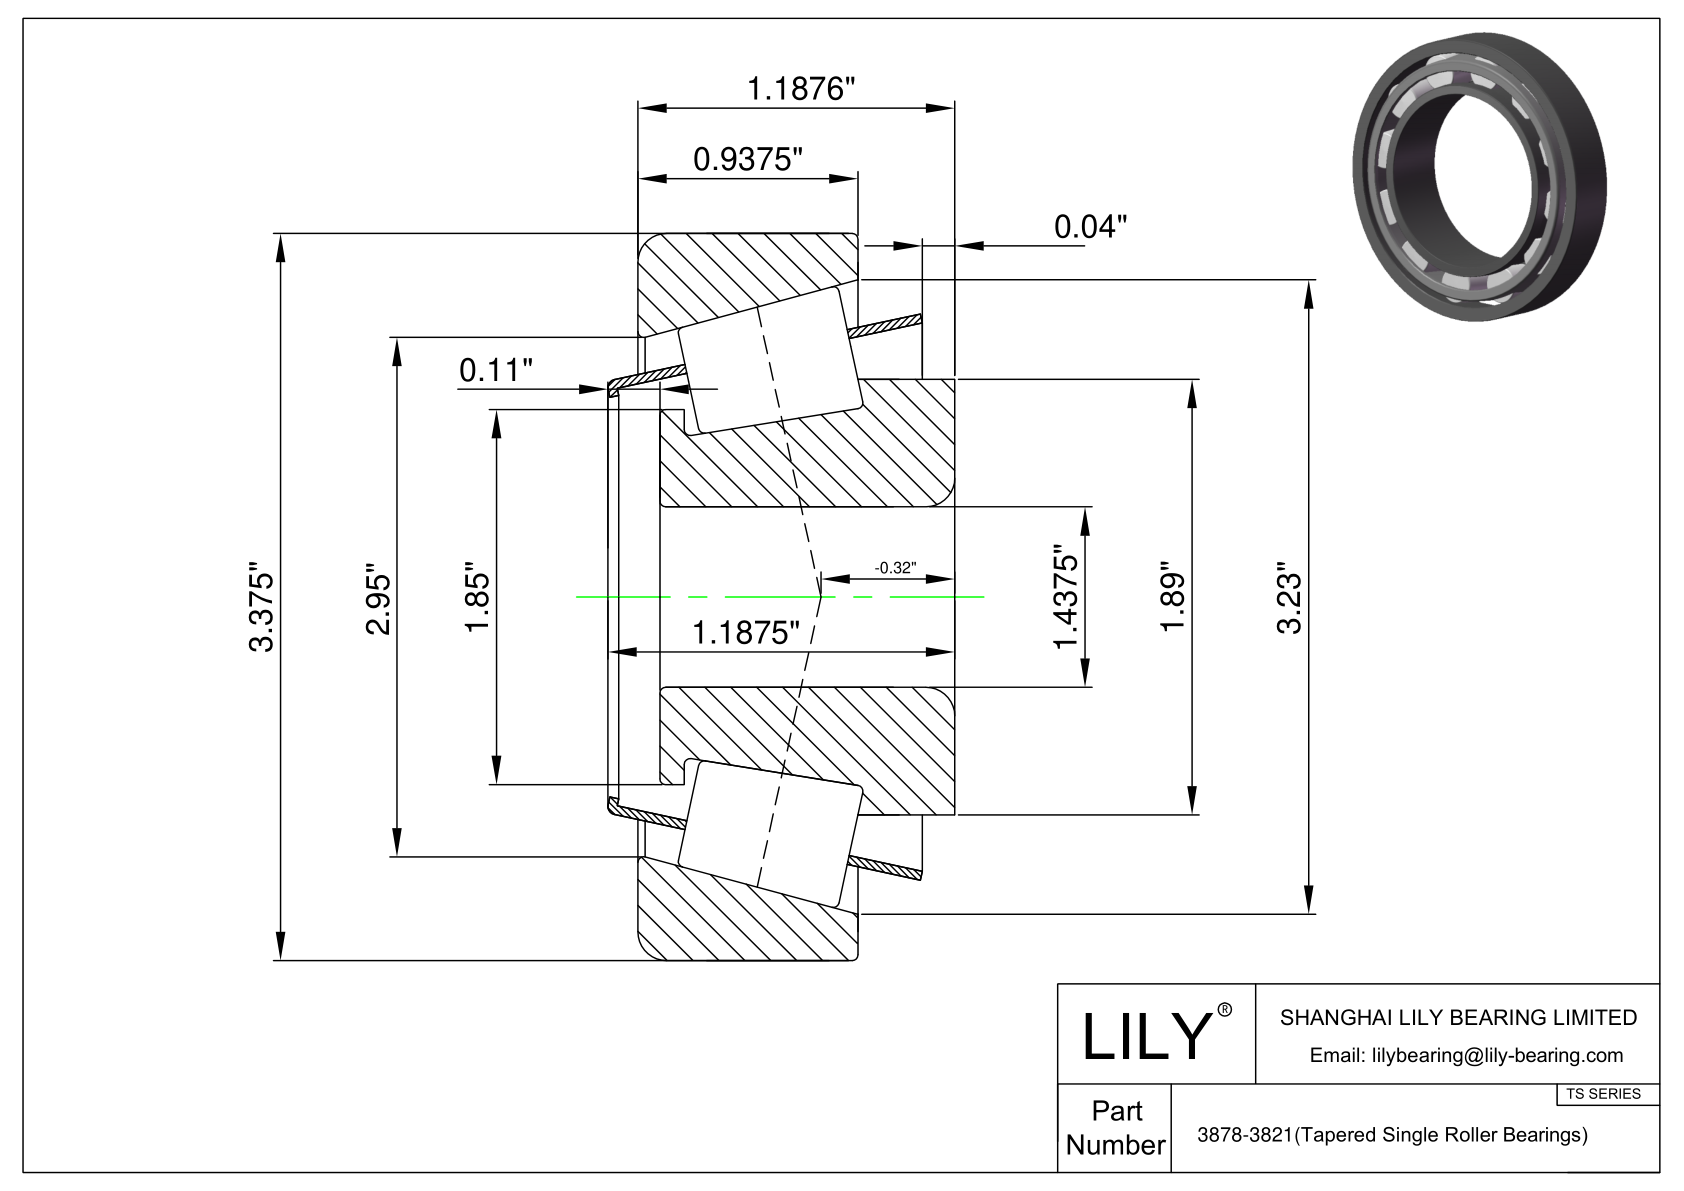 3878-3821 TS (Tapered Single Roller Bearings) (Imperial) cad drawing